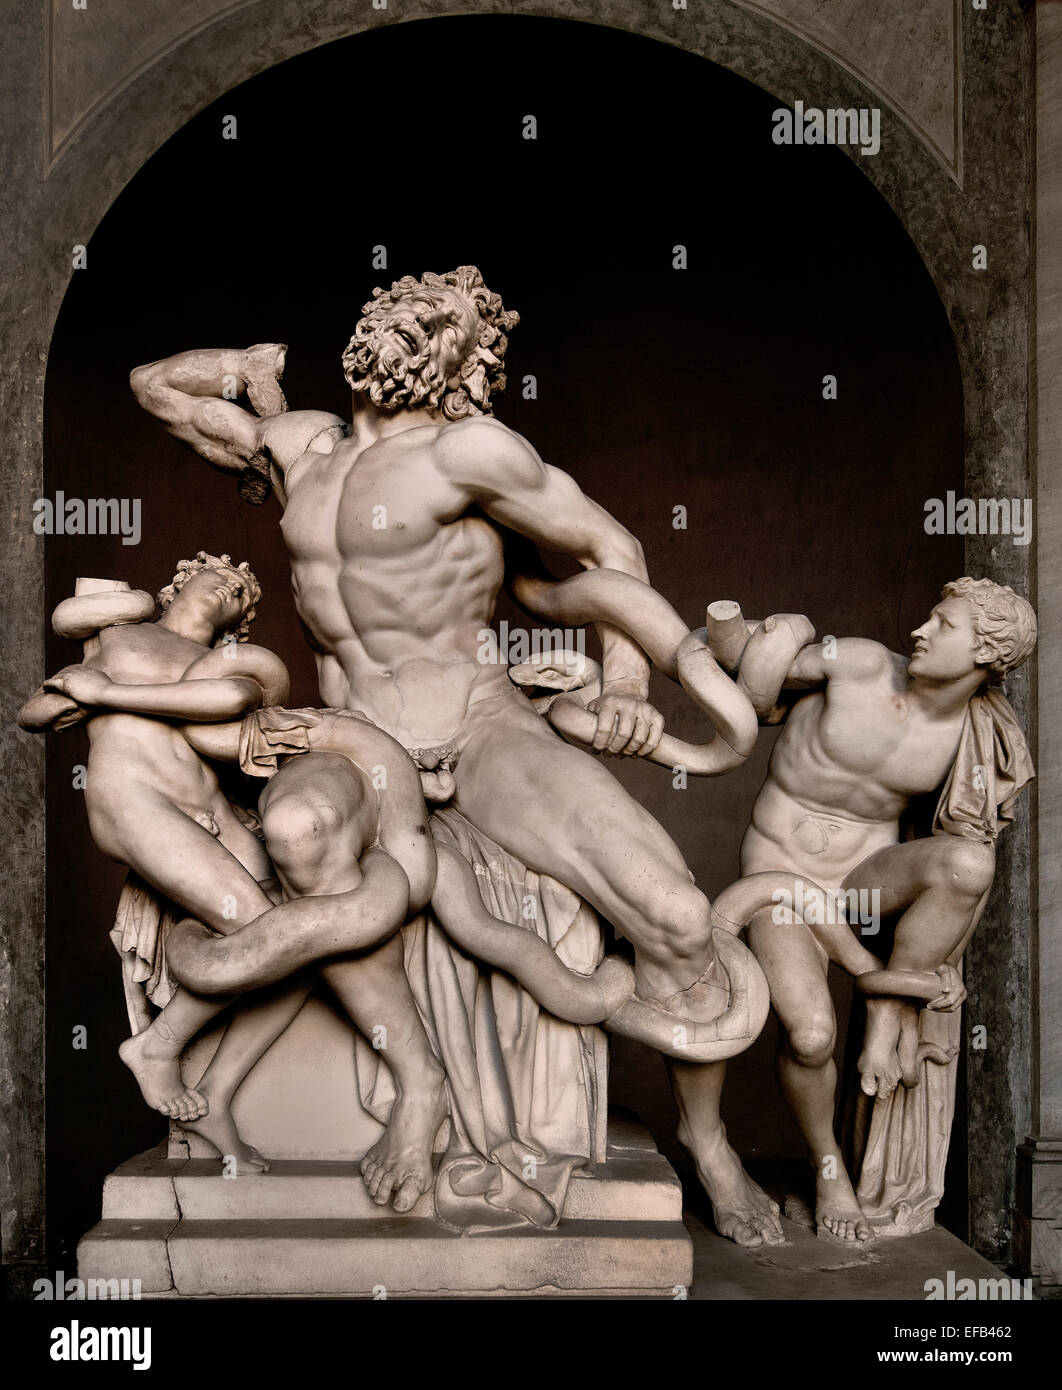 Laocoön and his sons ( Hagesandros Athenedoros Polydoros ) Laocoön Group. Marble, copy after an Hellenistic original from ca. 200 BC. Found in the Baths of Trajan, 1506. ( Vatican Museum Rome Italy ) Stock Photo